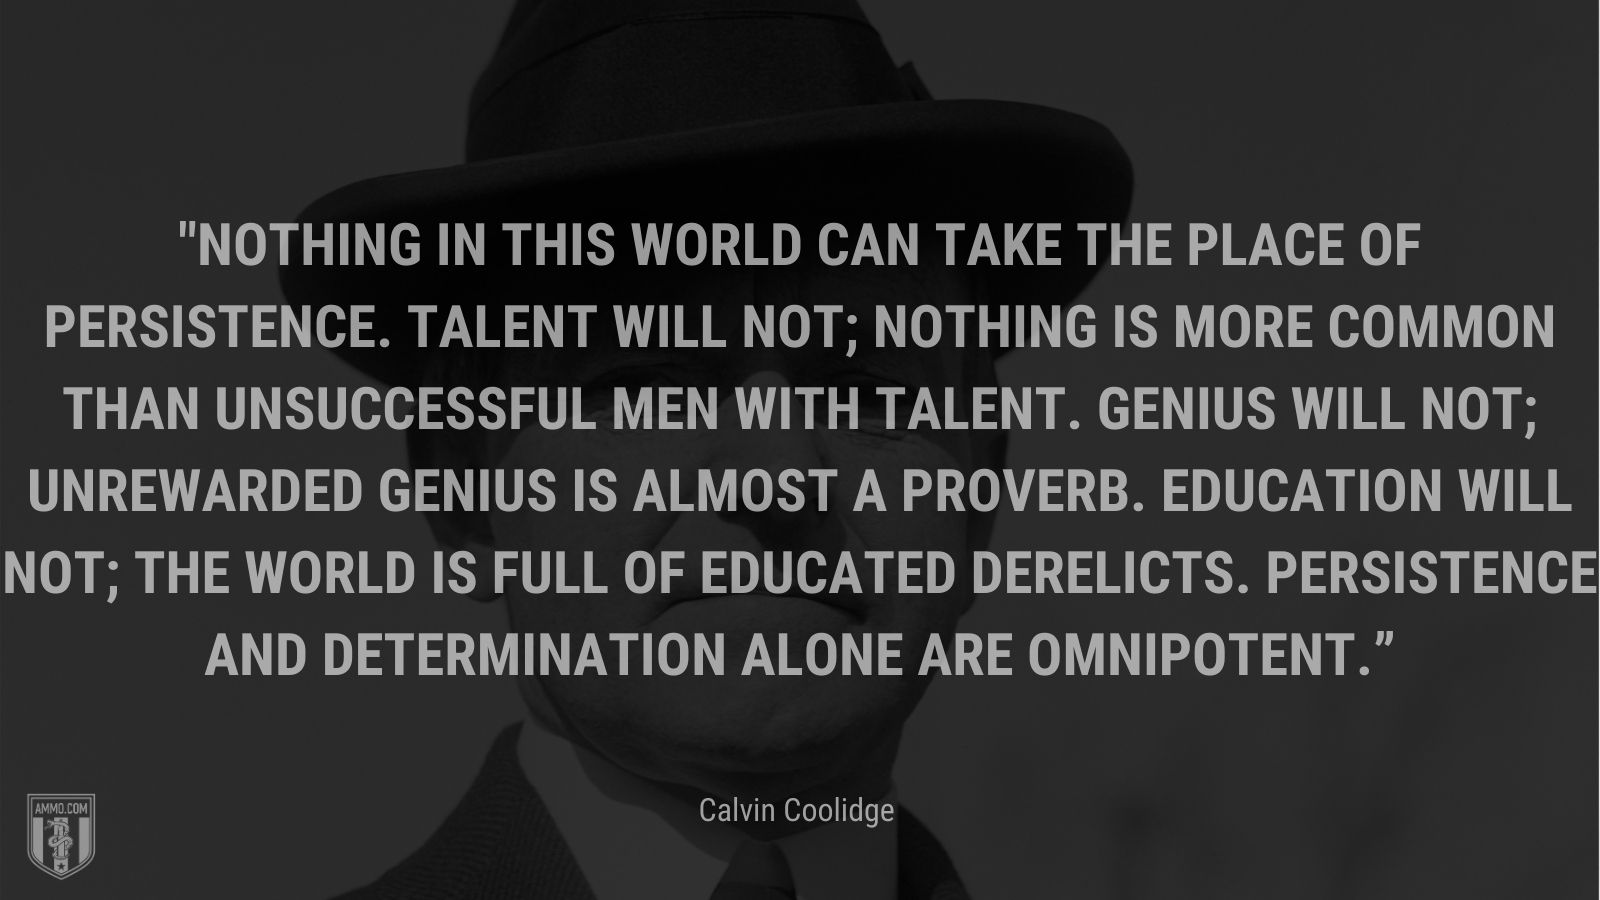 Nothing in this world can take the place of persistence.  Talent will not; nothing is more common than unsuccessful men with talent.  Genius will not; unrewarded genius is almost a proverb.  Education will not; the world is full of educated derelicts.  Persistence and determination alone are omnipotent.